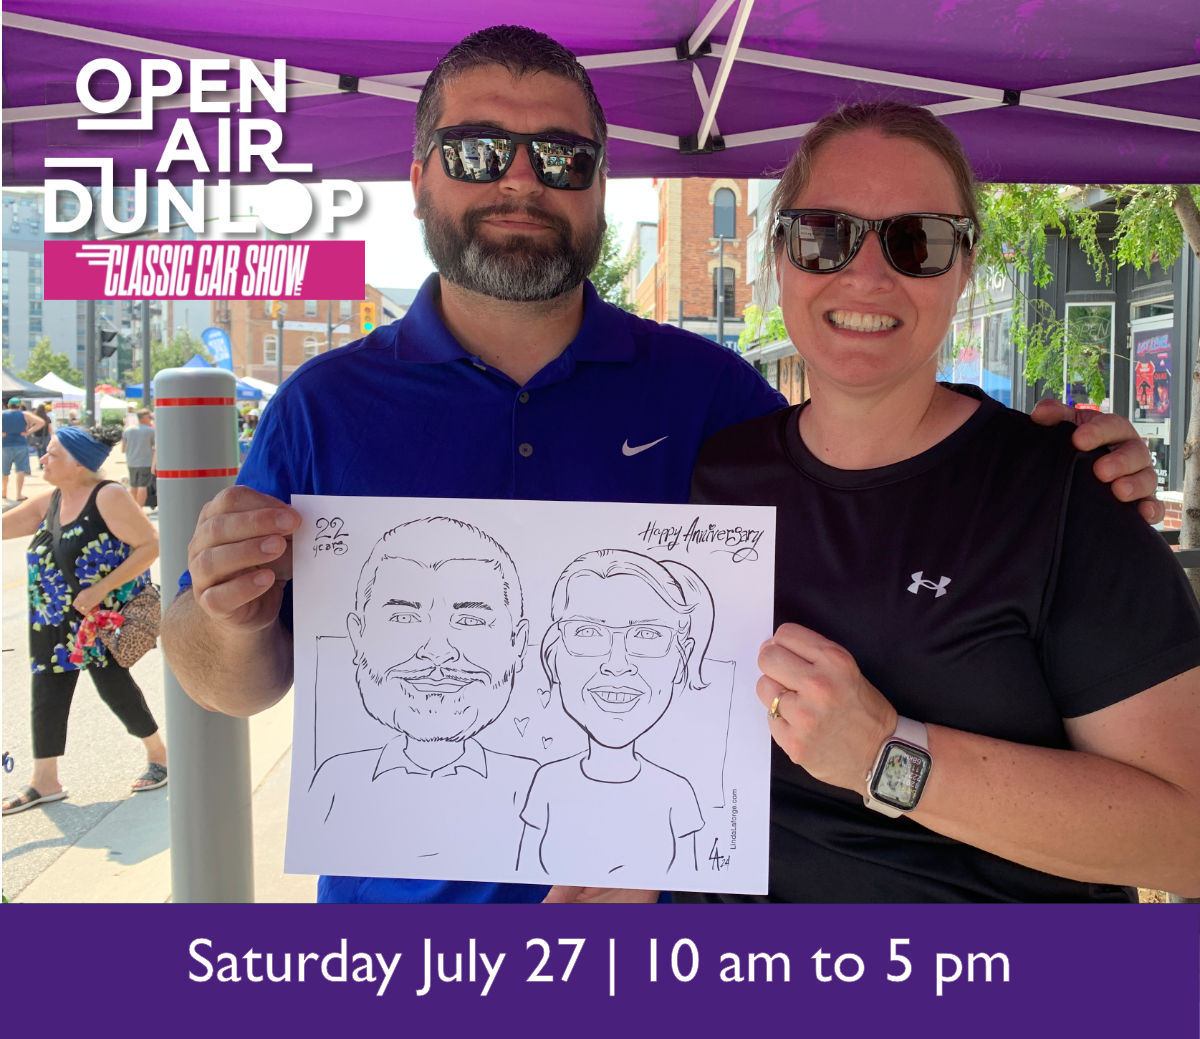 Couple holding caricature of themselves at Open Air Dunlop in Barrie